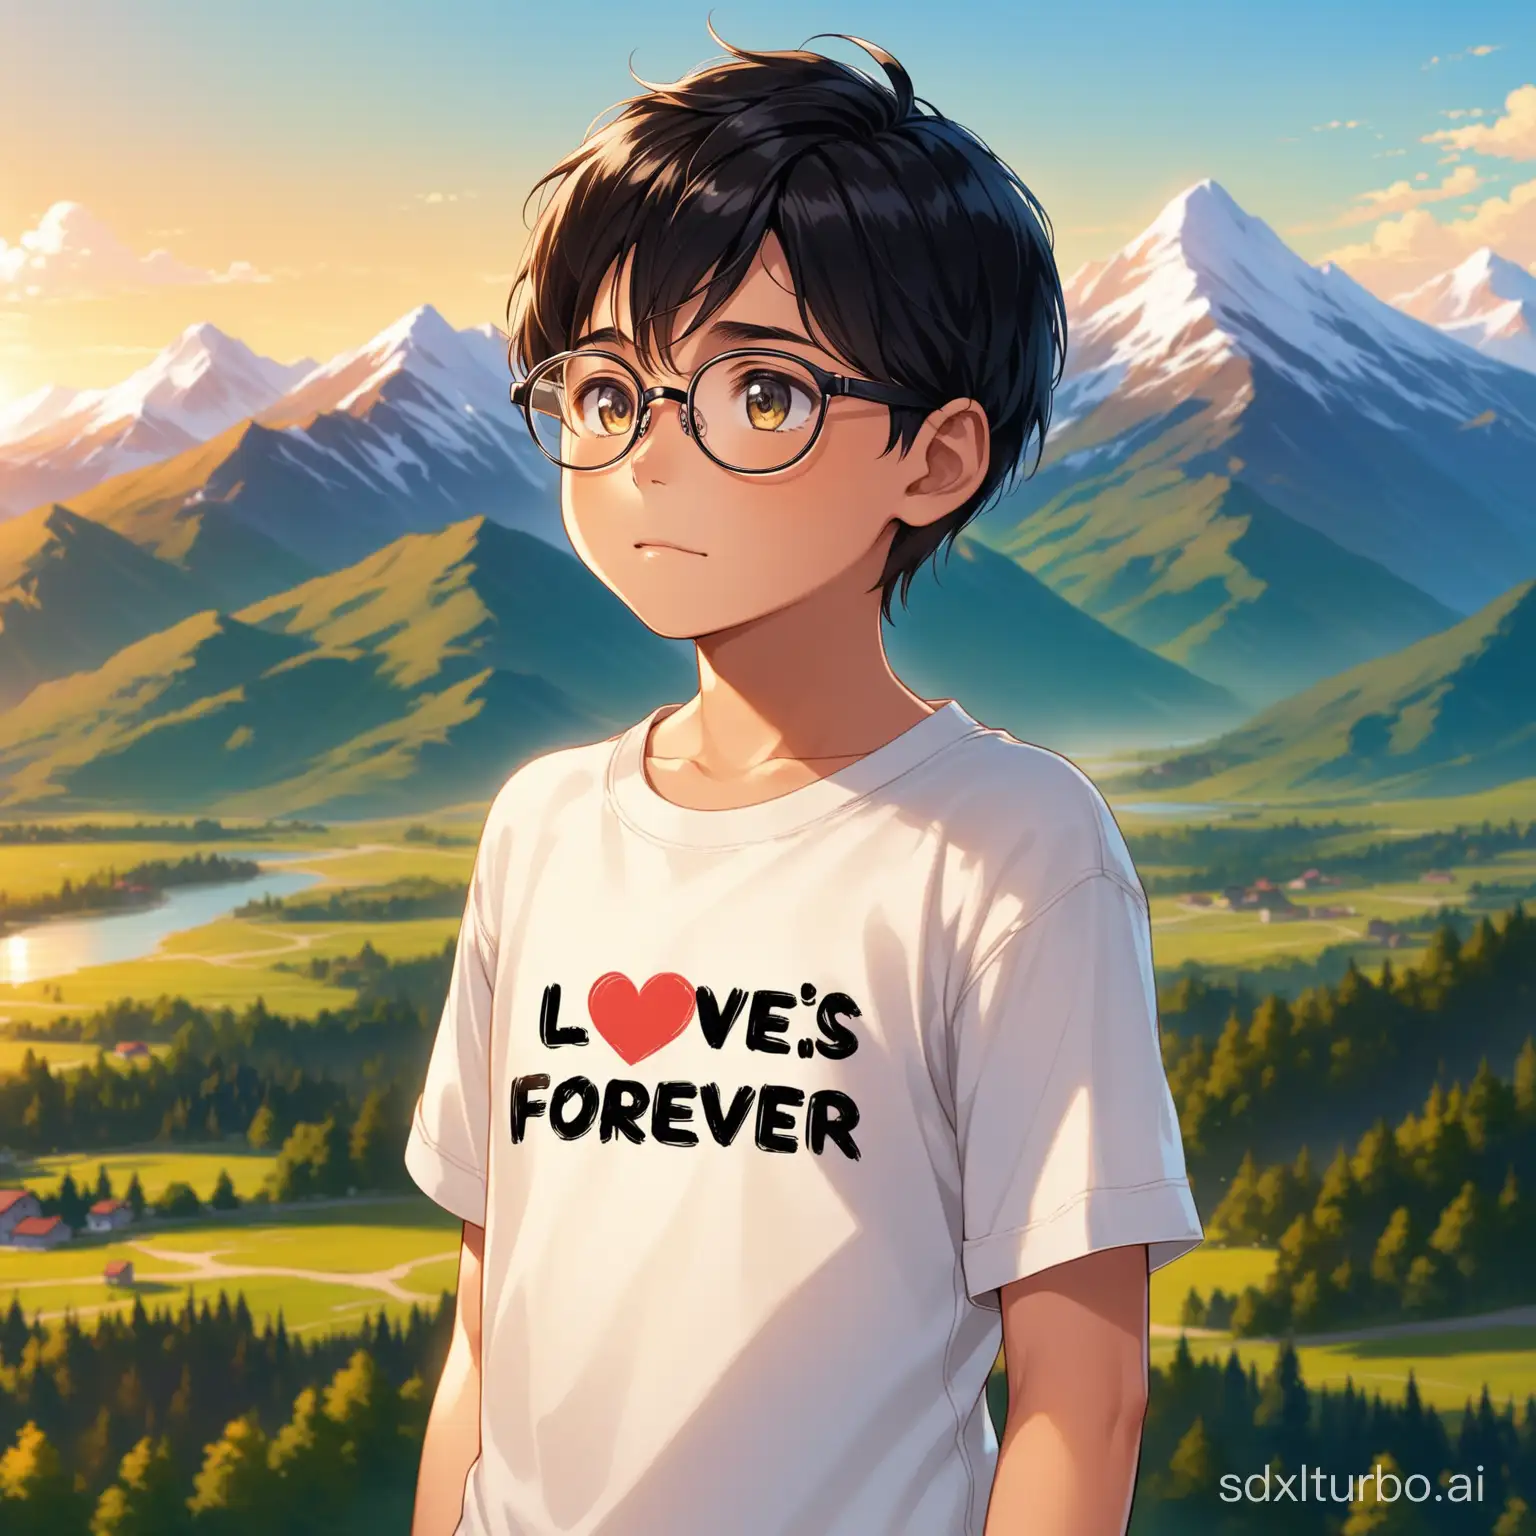 A boy about ten years old with glasses, black hair, wearing a white T-shirt with 'LOVE IS FOREVER' written on the chest, looking towards the distance with mountains in front of him.